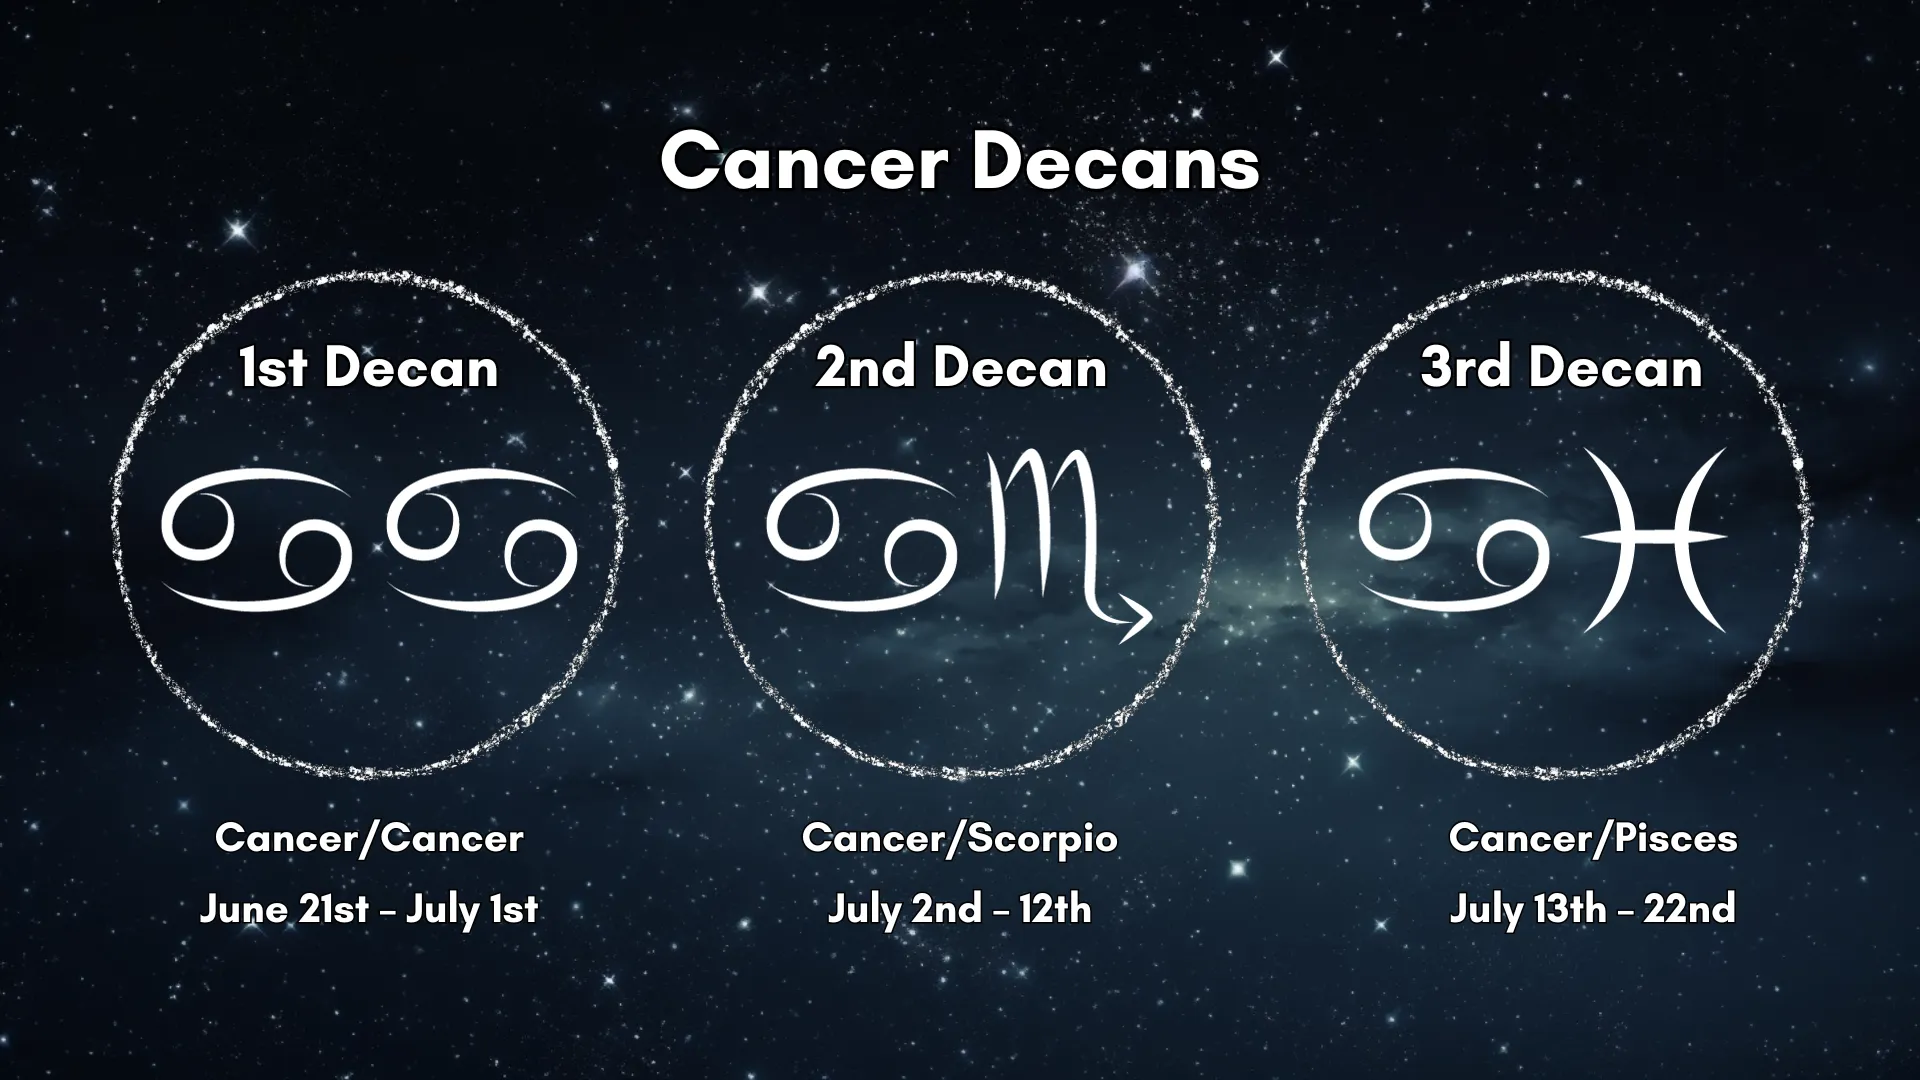 The Cancer Decans are laid out in a chart that is easy to understand.